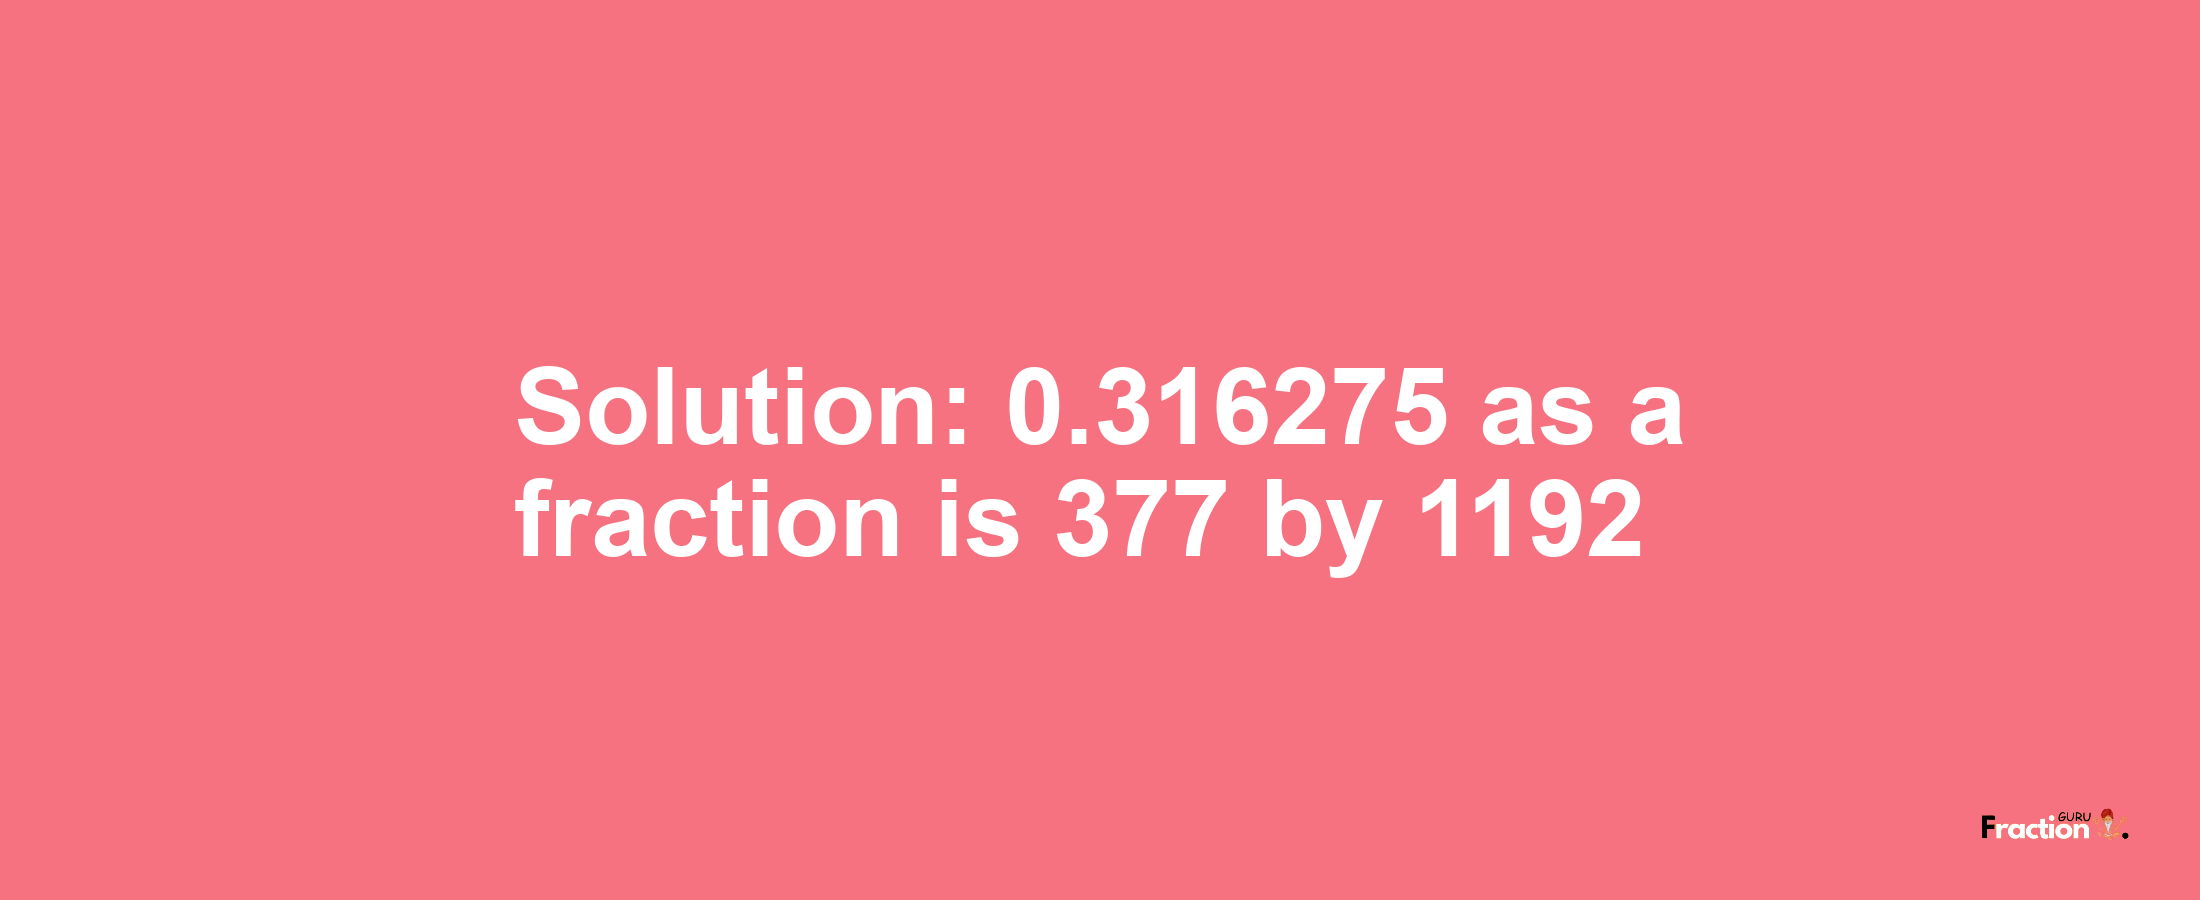 Solution:0.316275 as a fraction is 377/1192